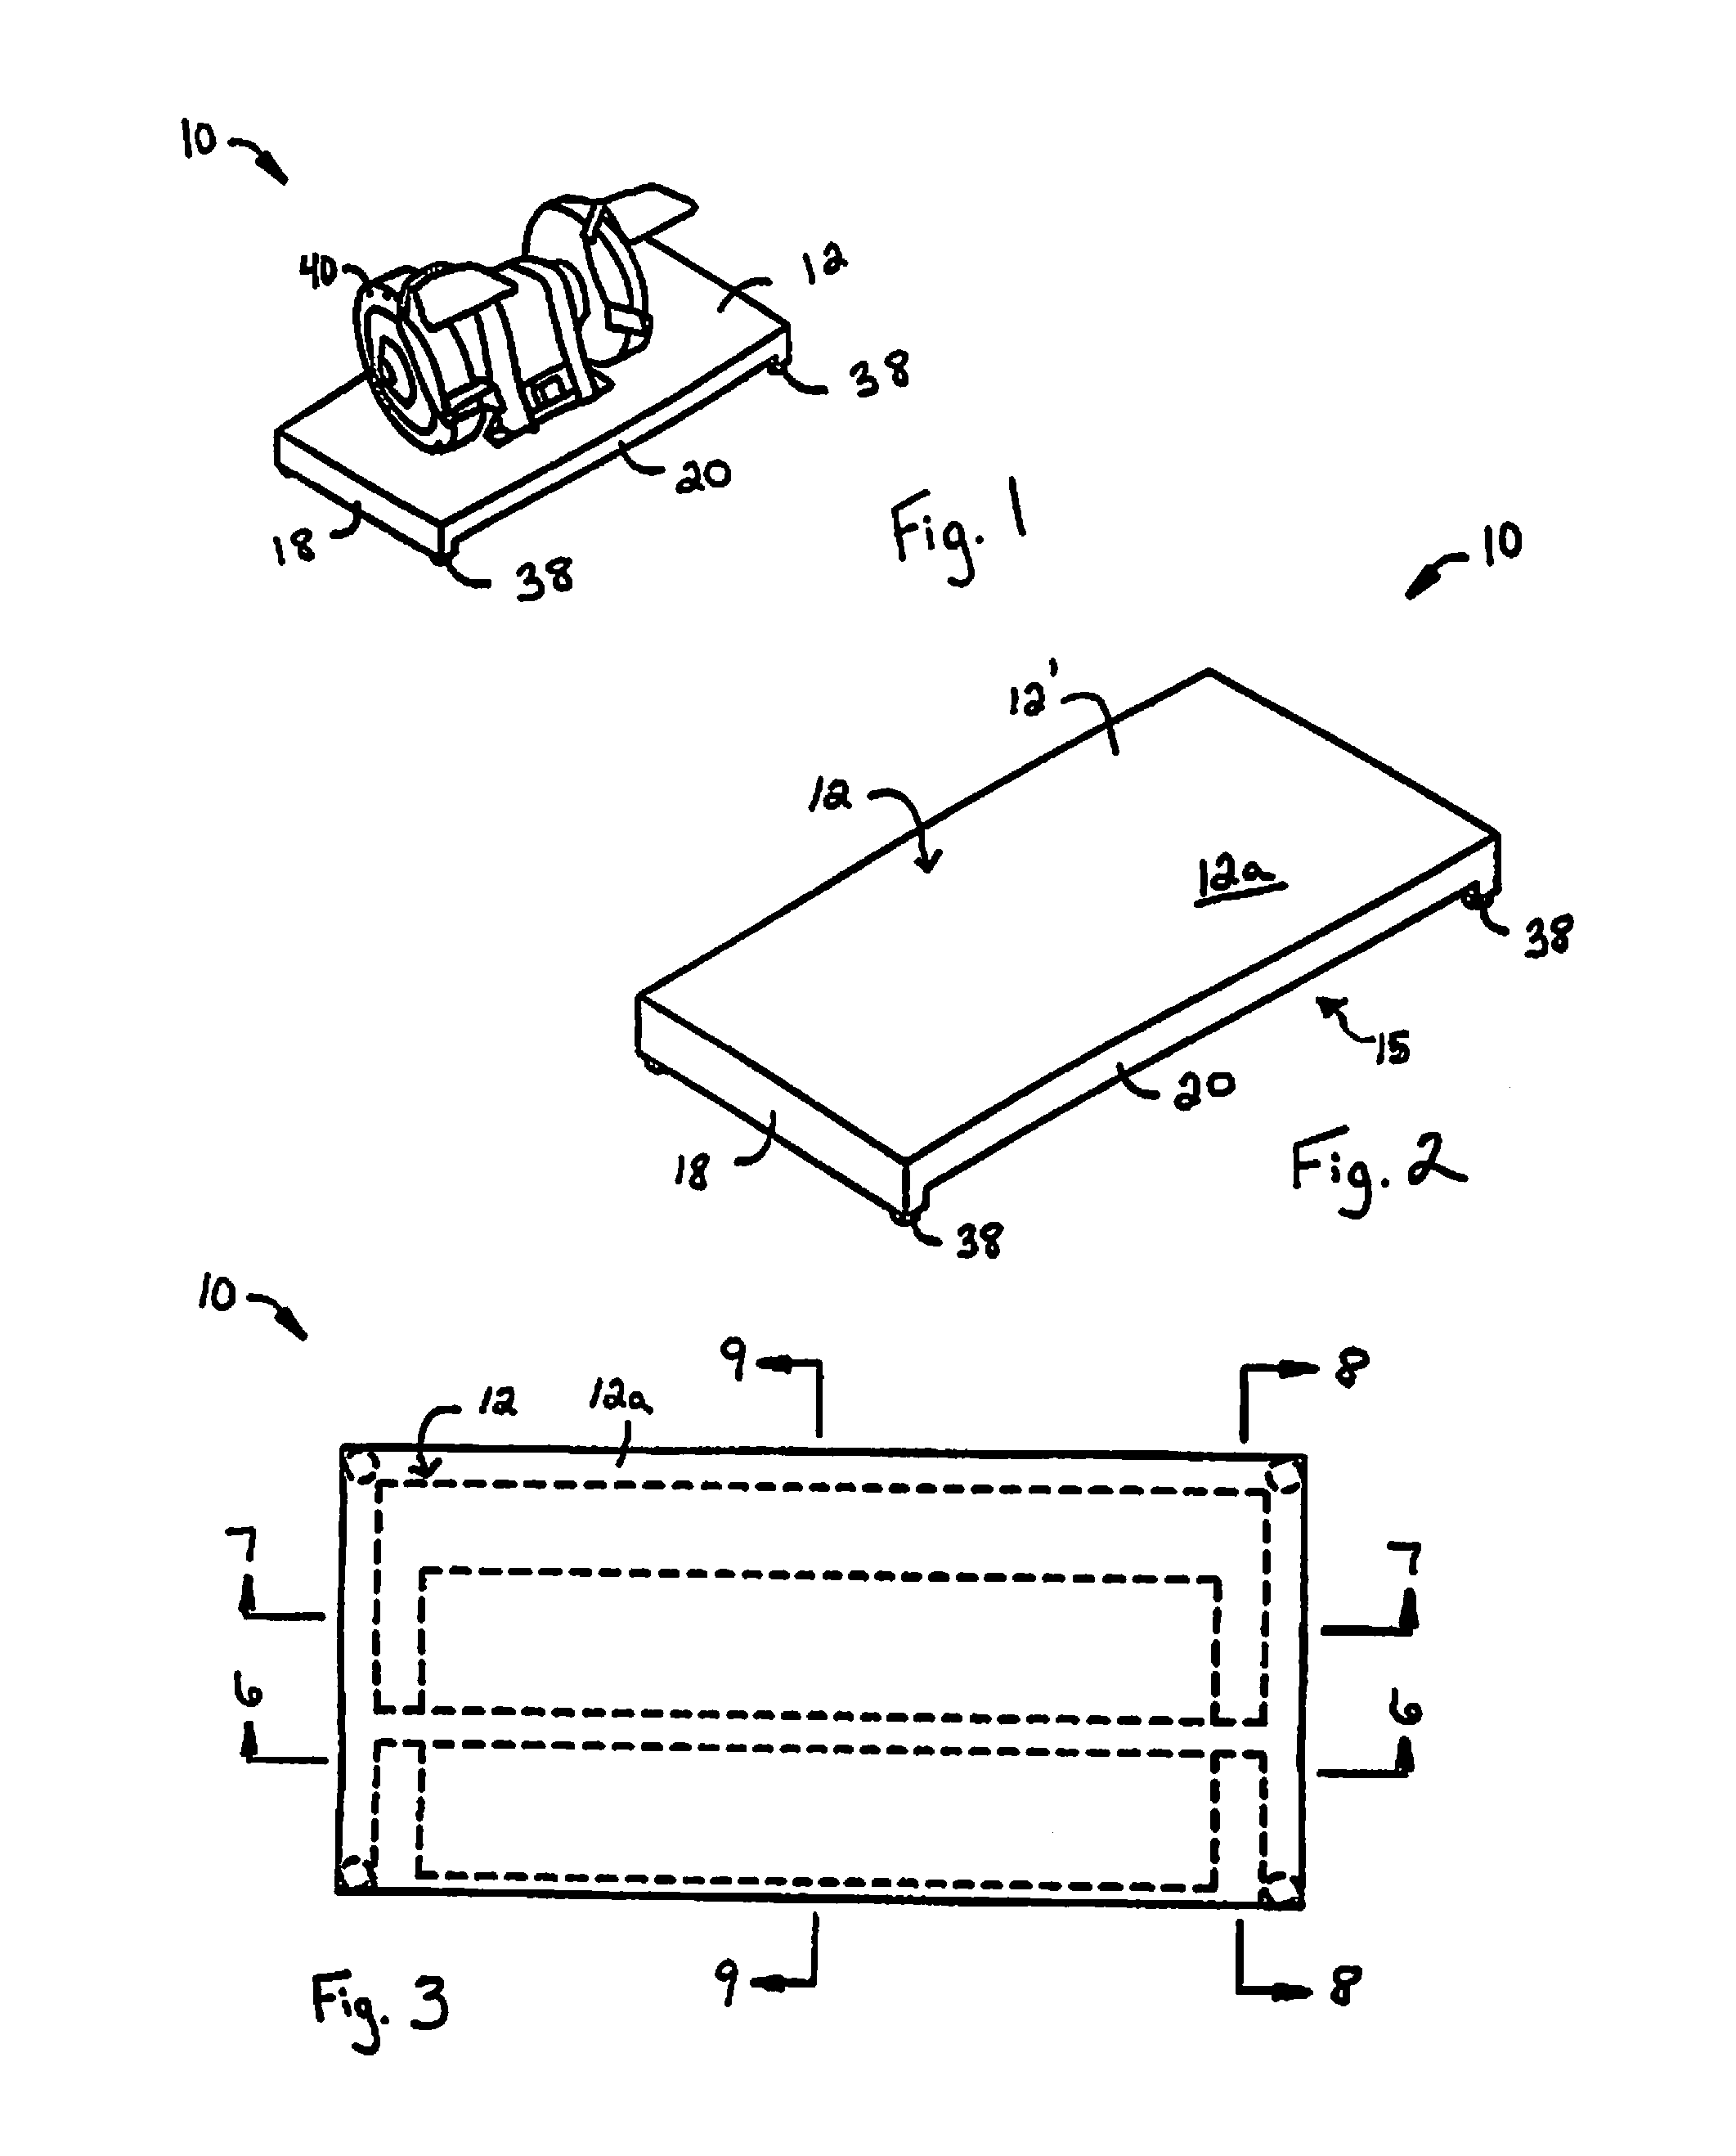 Universal mounting platform and system